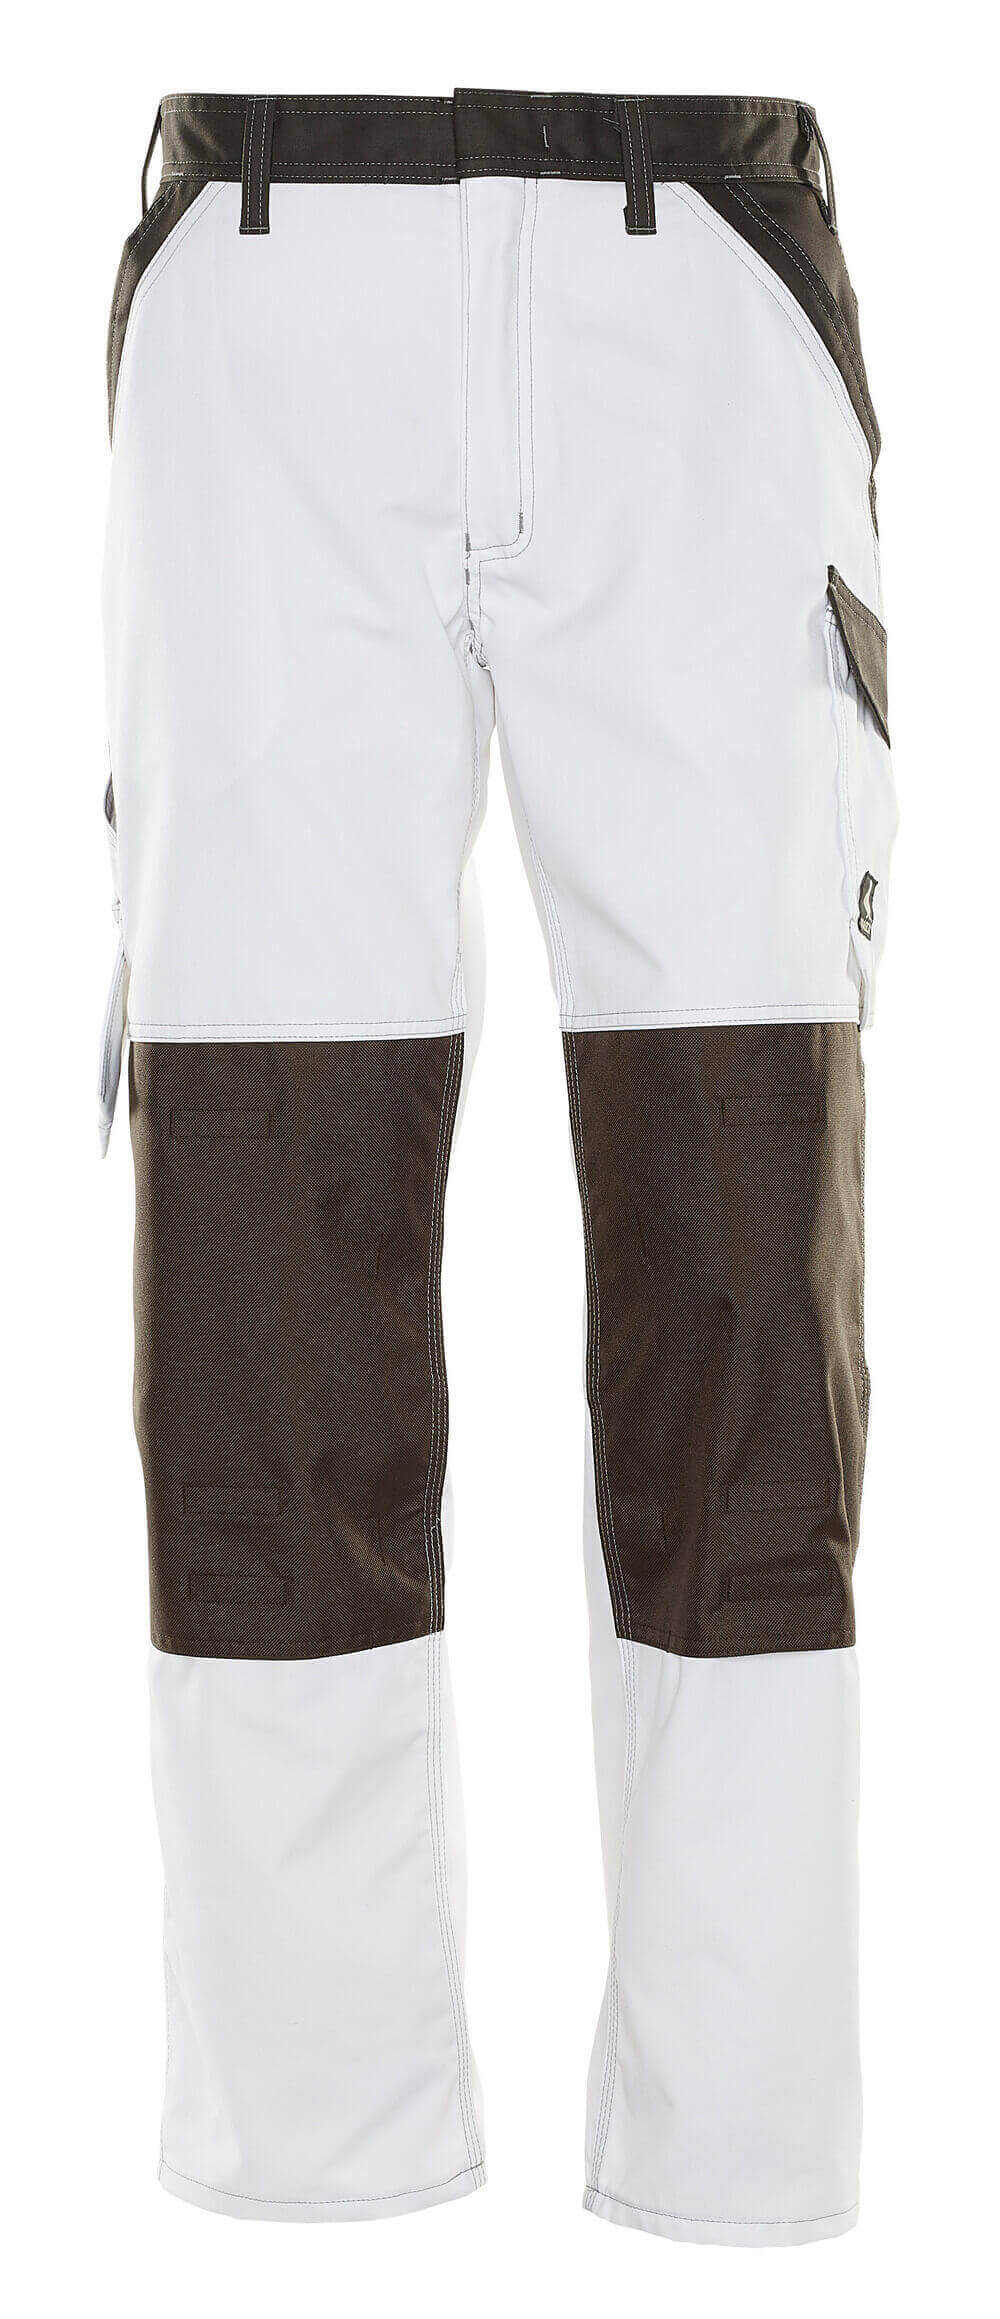 Mascot LIGHT  Temora Trousers with kneepad pockets 15779 white/dark anthracite